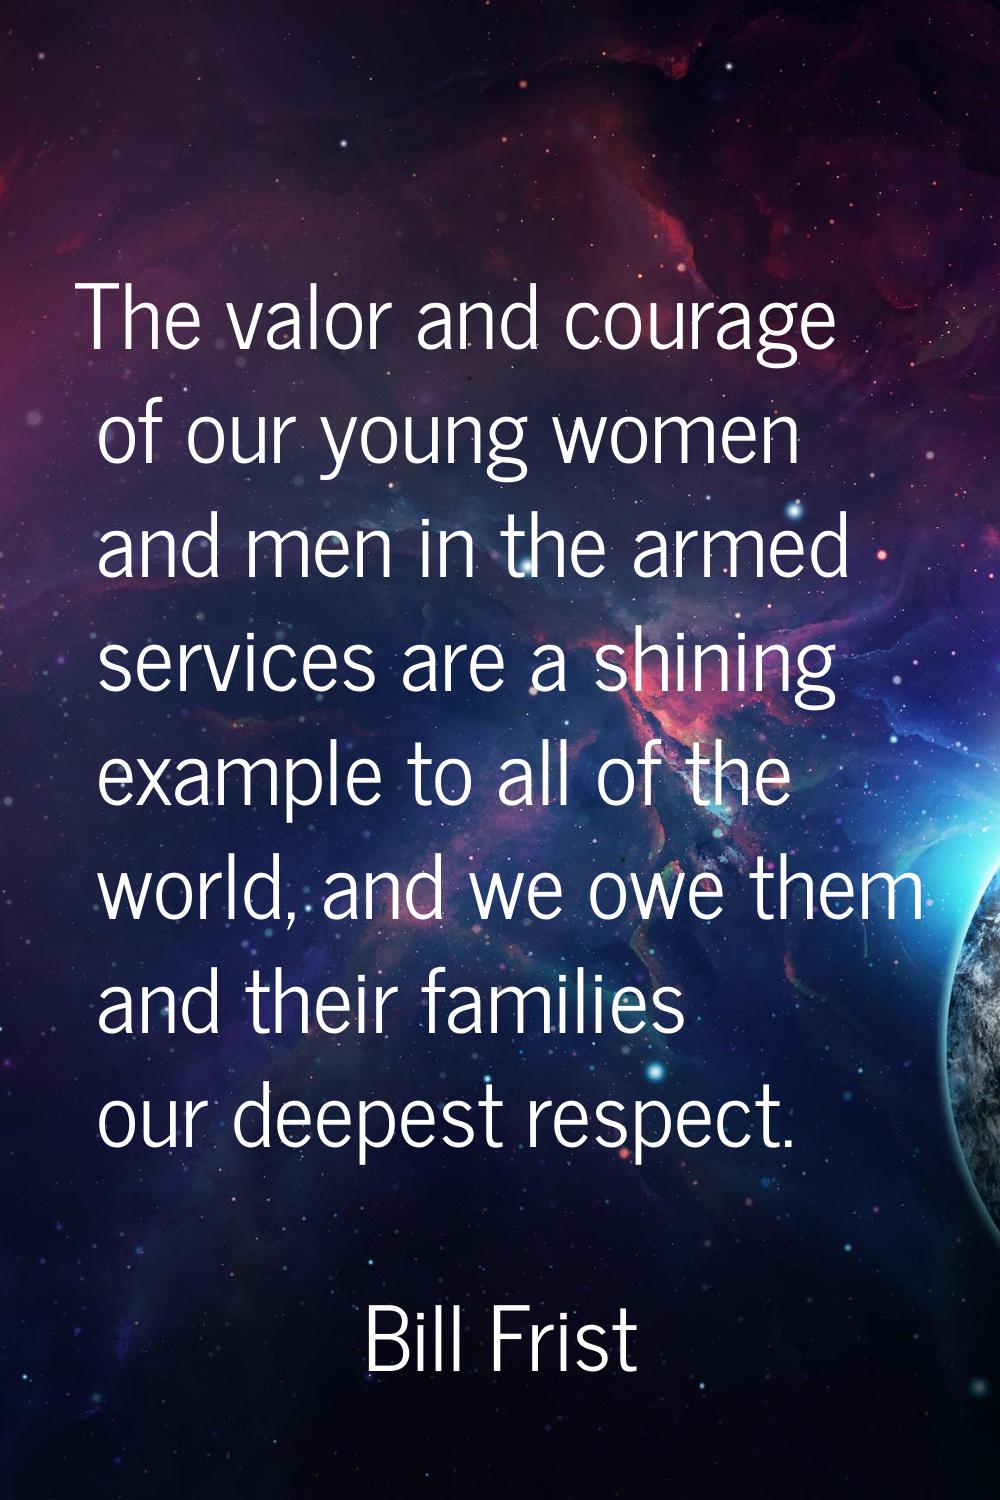 The valor and courage of our young women and men in the armed services are a shining example to all